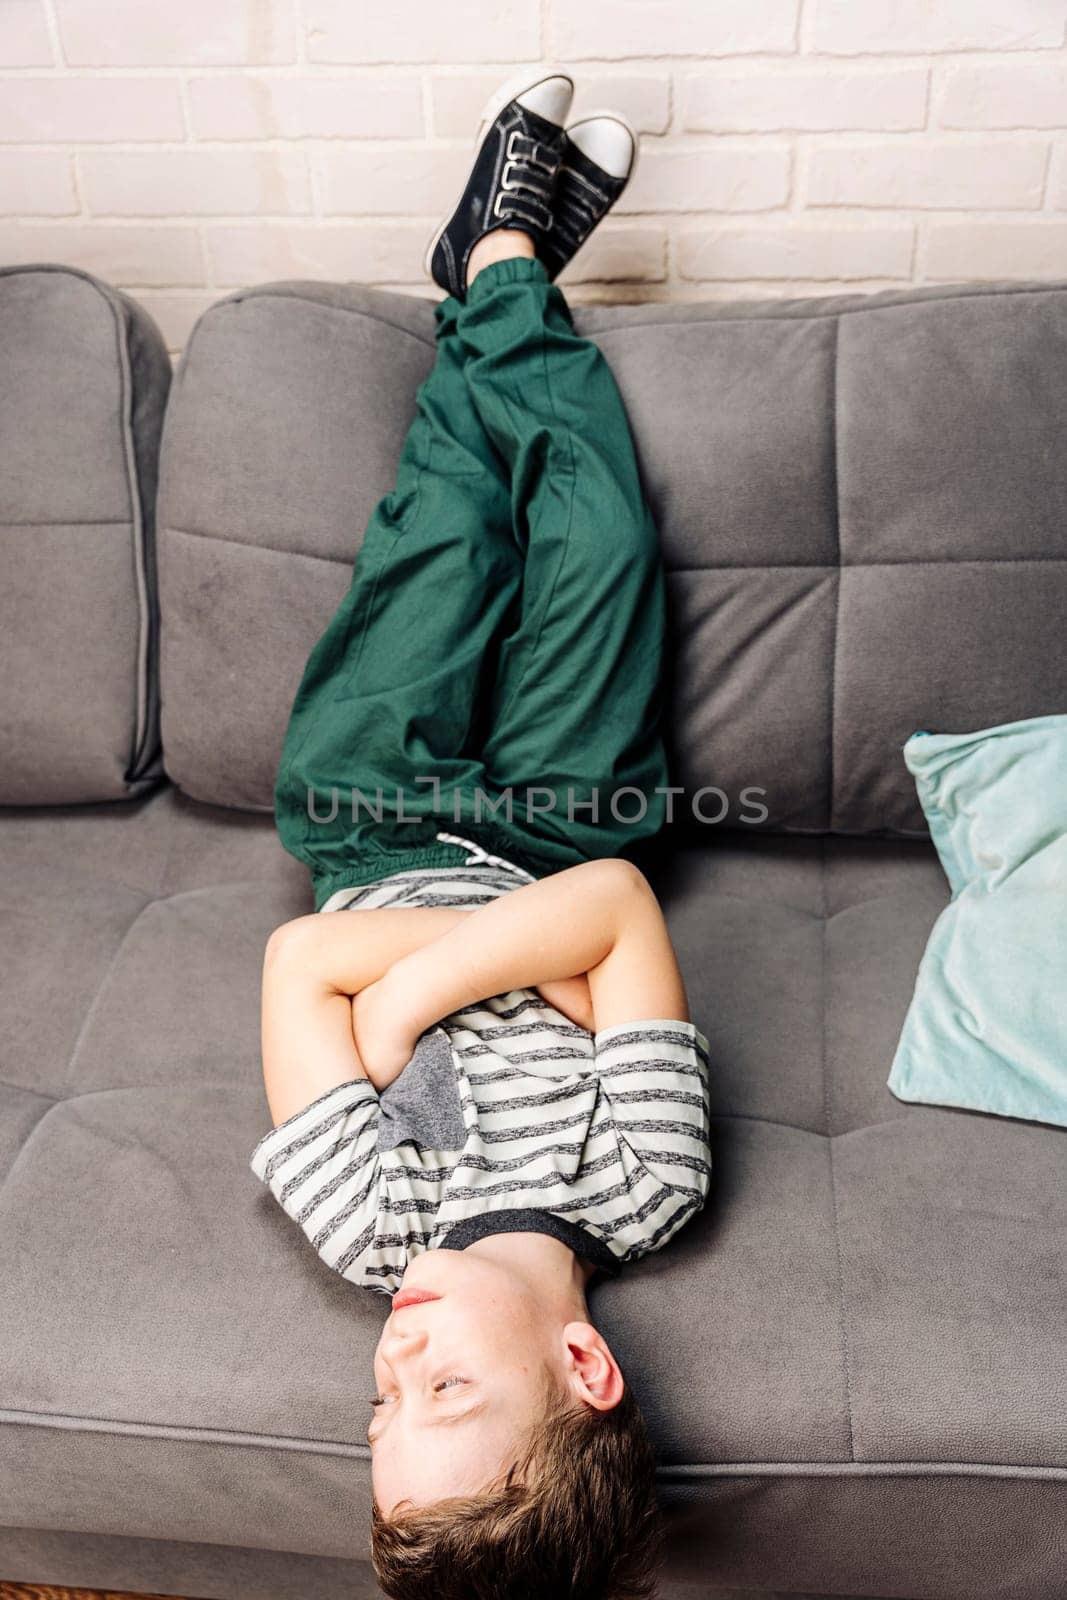 The child is lying in classic sneakers on a cozy sofa in the living room, with his feet on the back of the sofa, resting and relaxing. comfortable casual clothes and shoes.the child is lying upside down